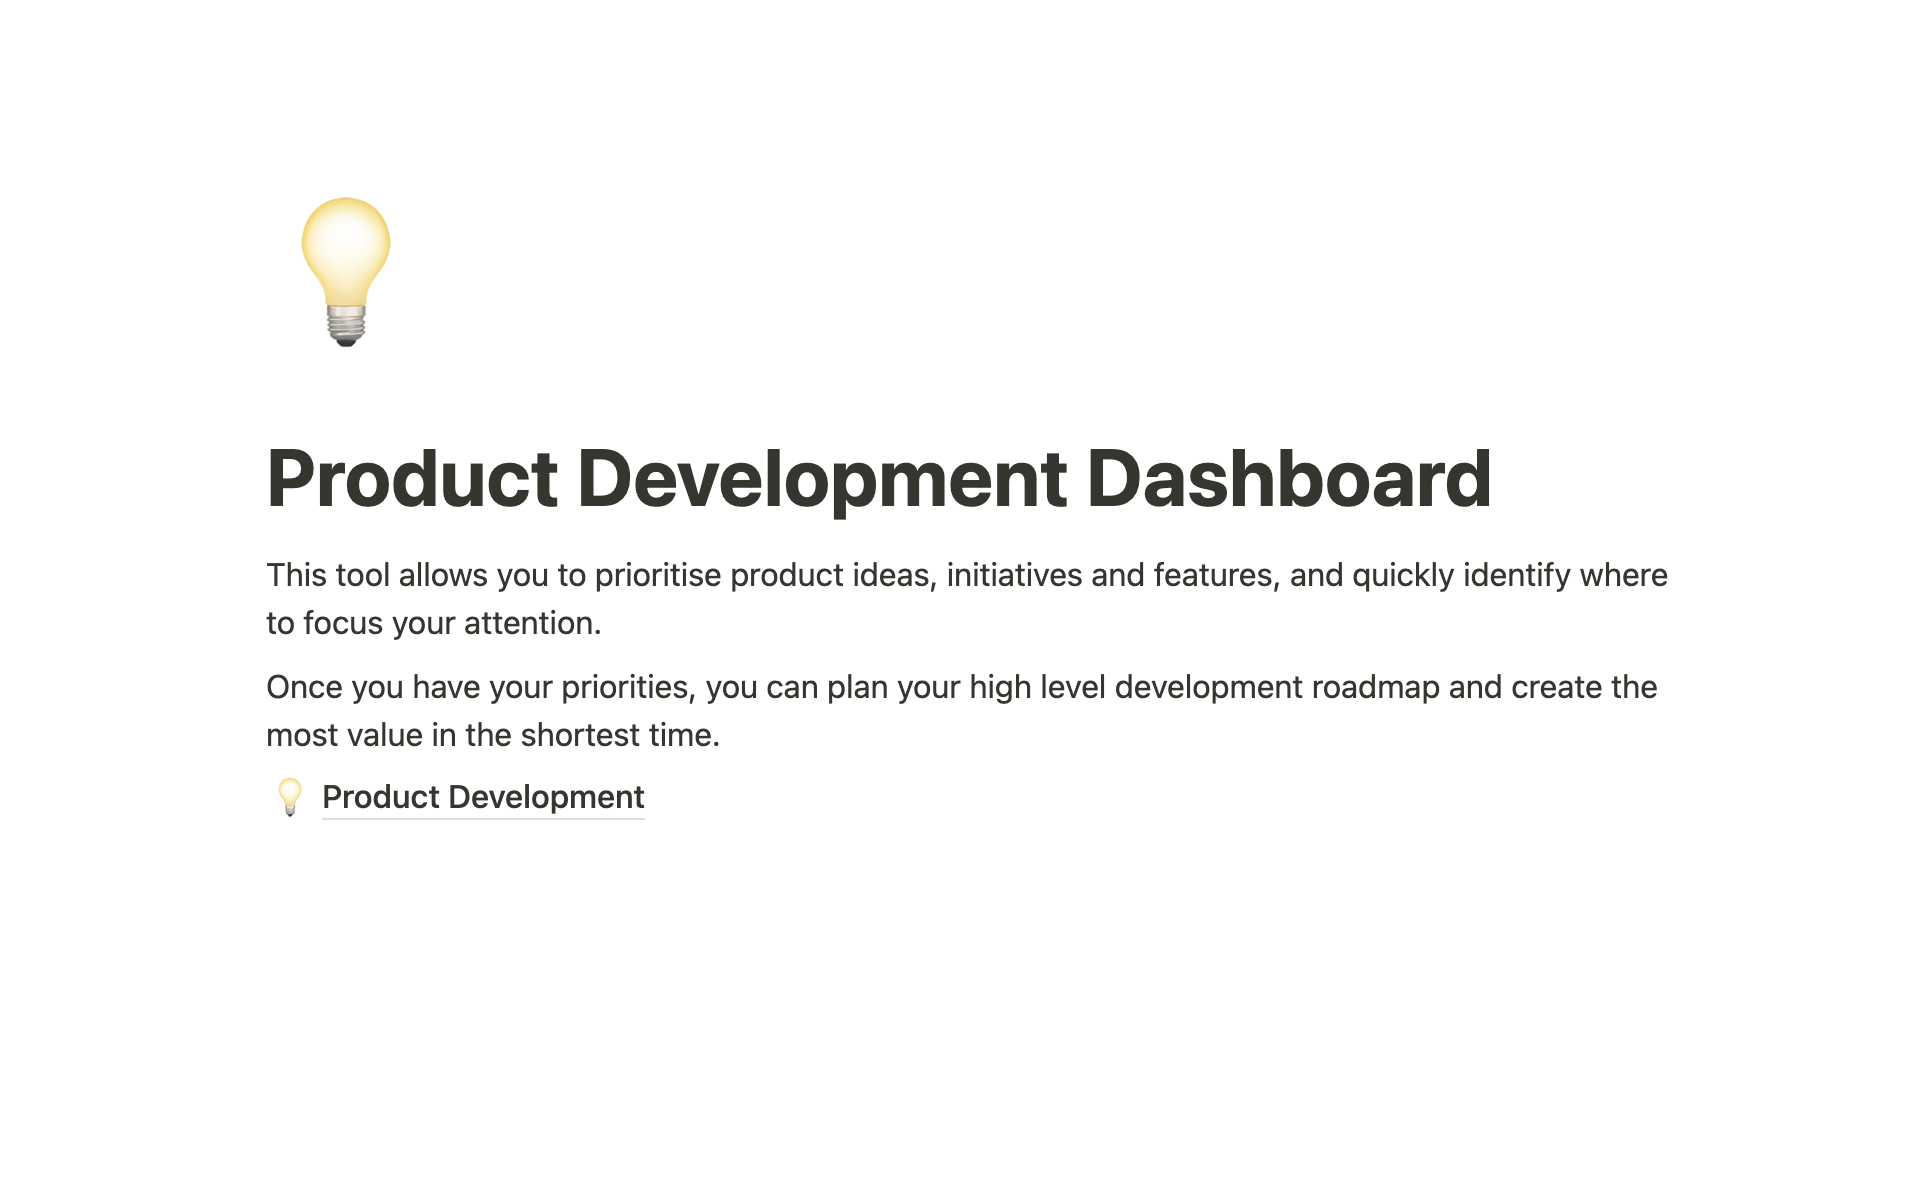 Helps product teams identify ideas and assess them at a high level.